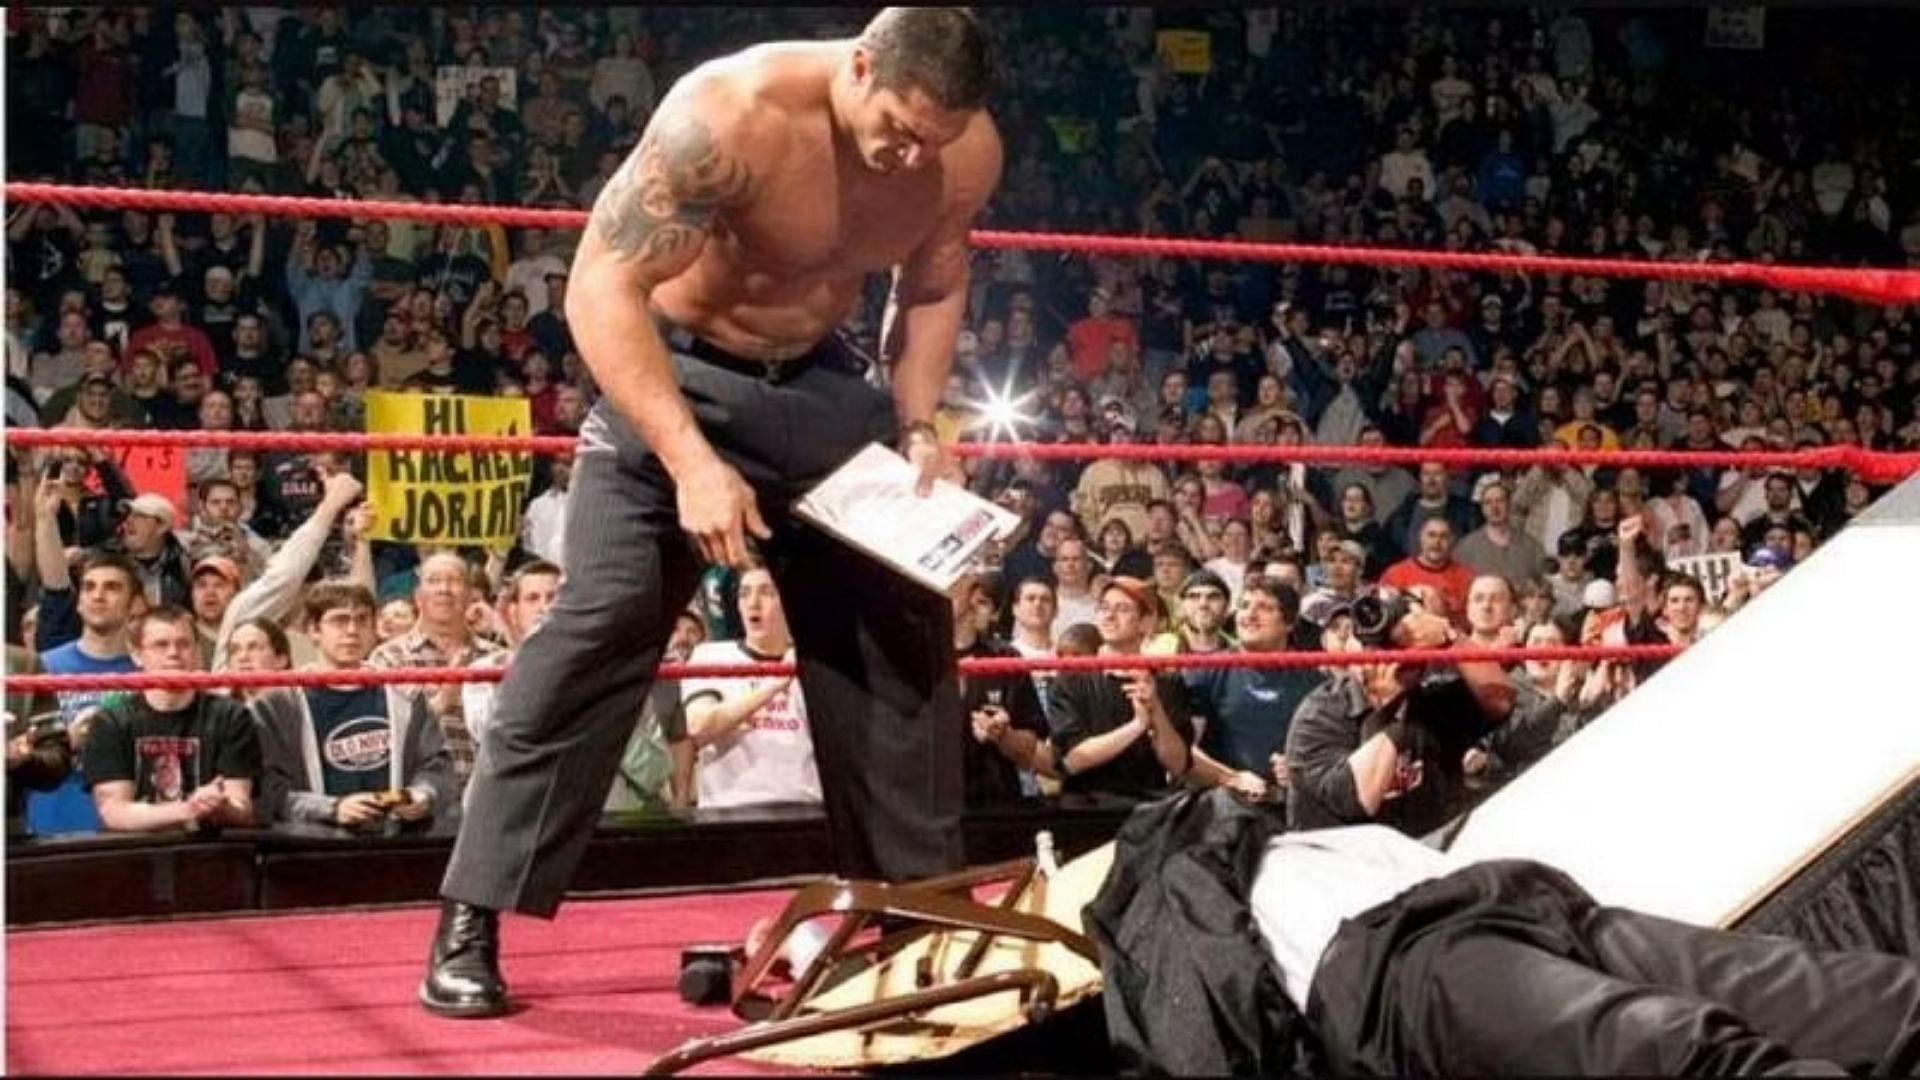 Batista destroyed Triple H on his way to the top